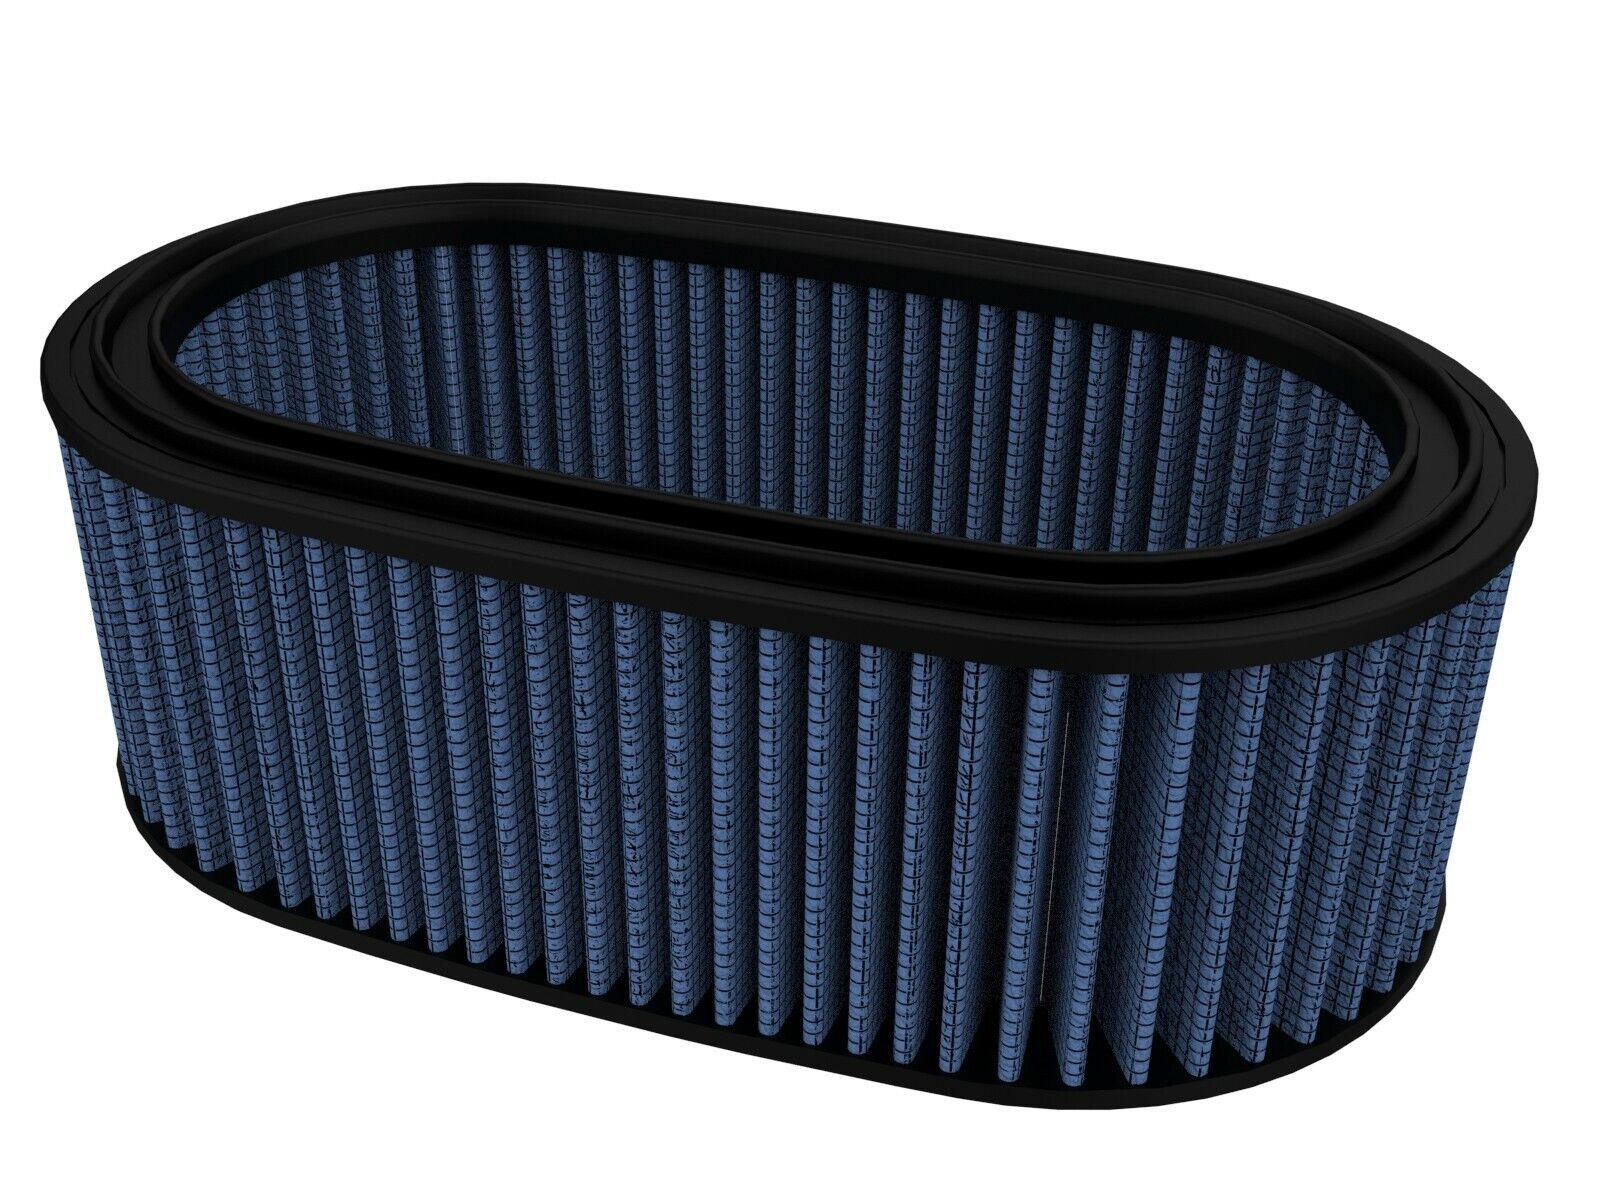 aFe Performance Air Filter for C8 Corvette | 10-10148 | 2020 + | IN STOCK